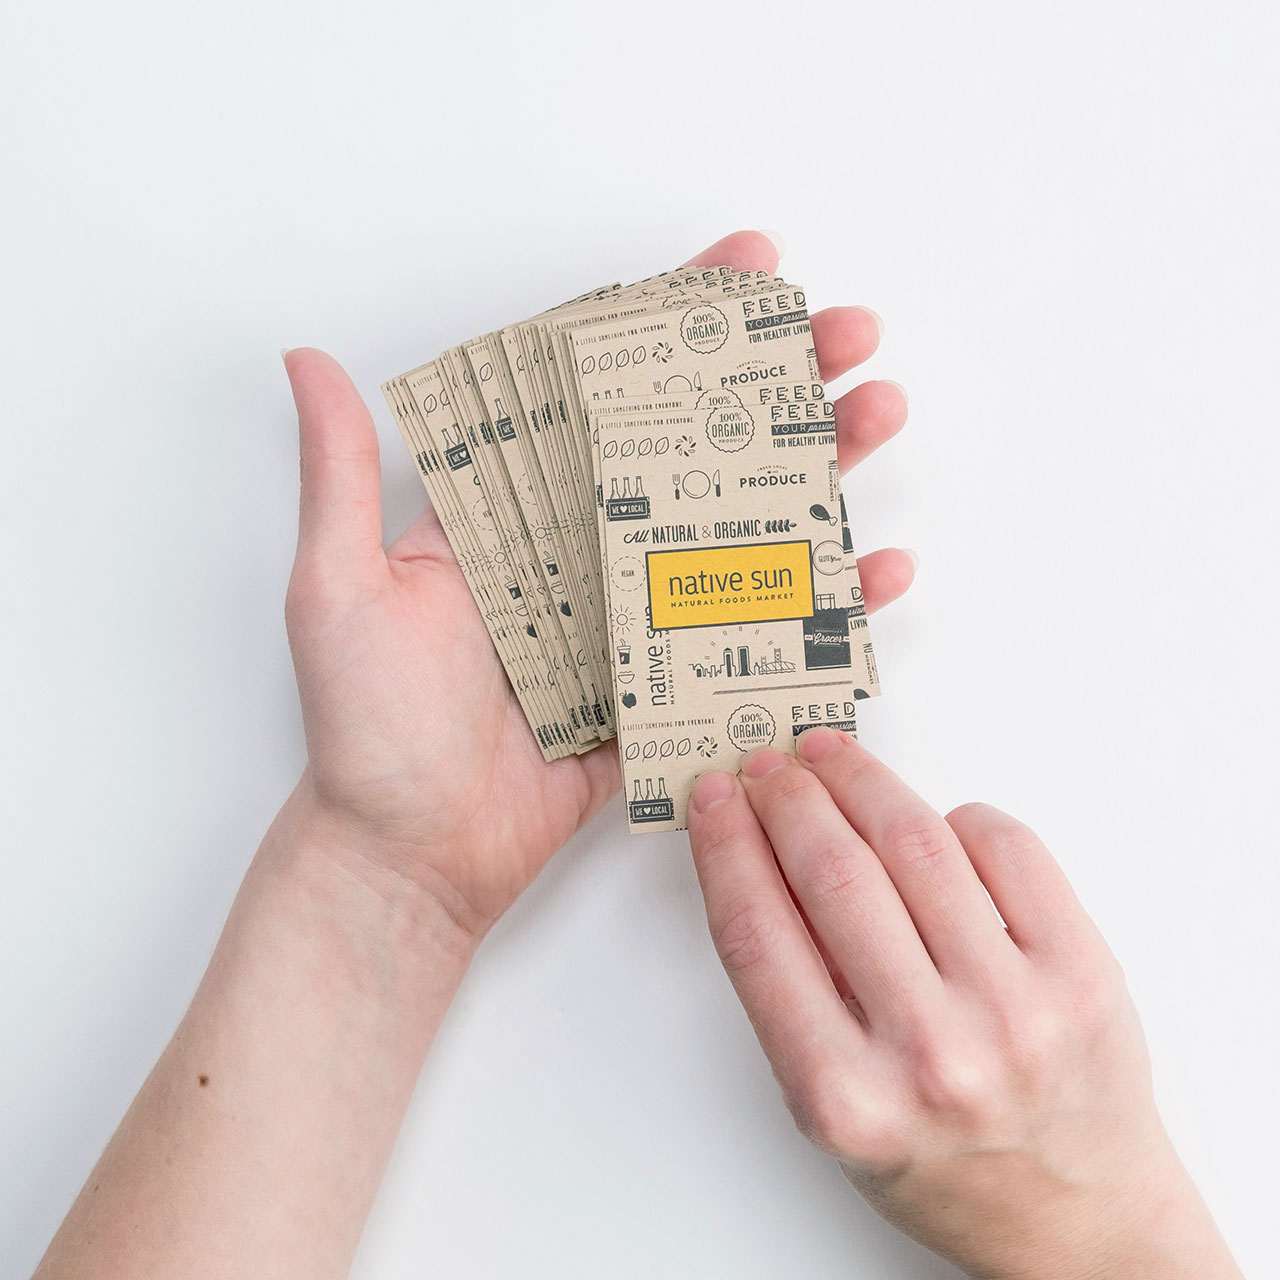 Two hands holding a stack of fanned-out business cards printed on Kraft paper.